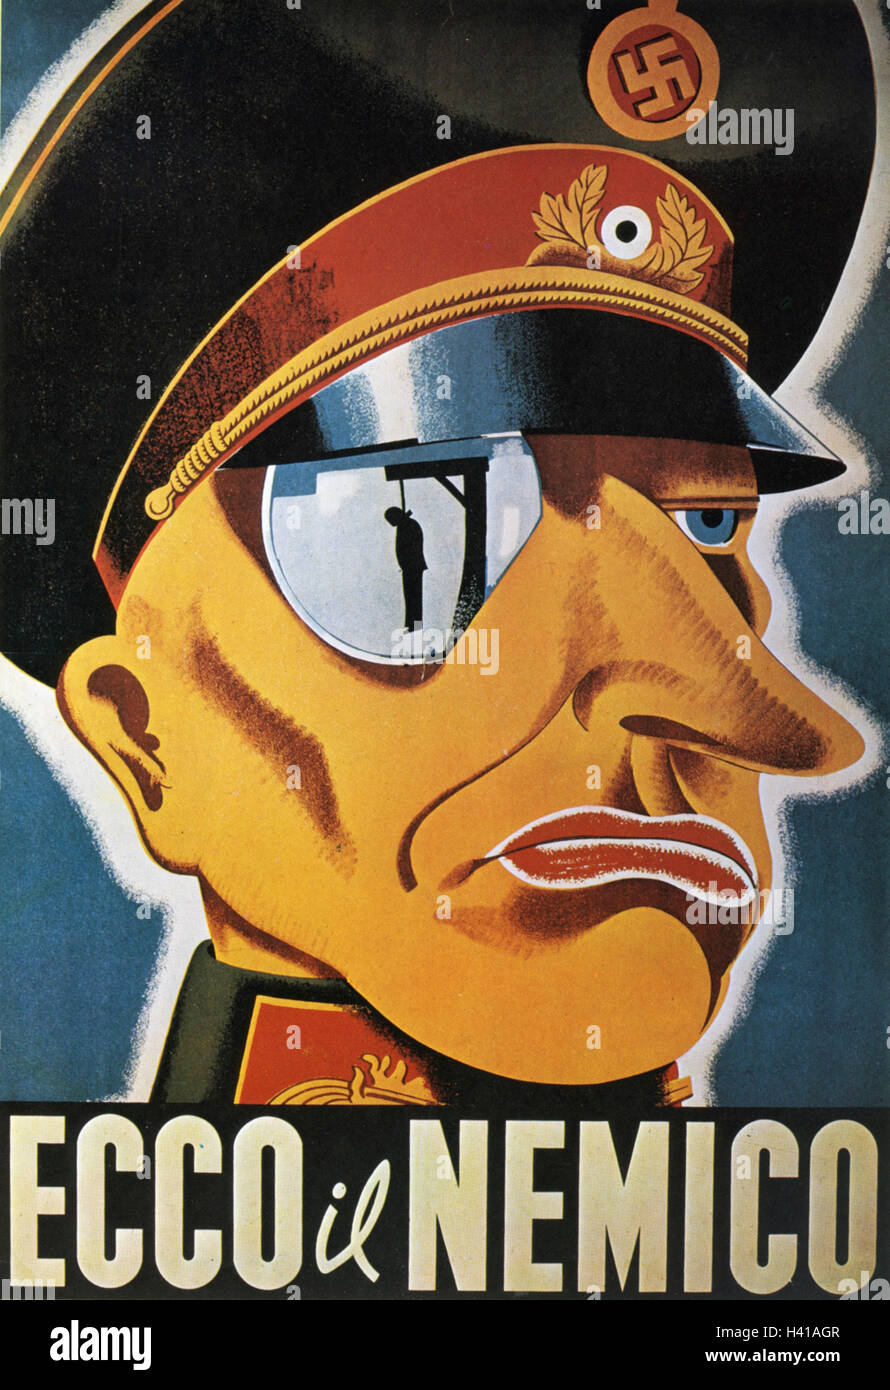 ECCO IL NEMICO (This is the Enemy) Italian anti-facist poster about 1942 Stock Photo